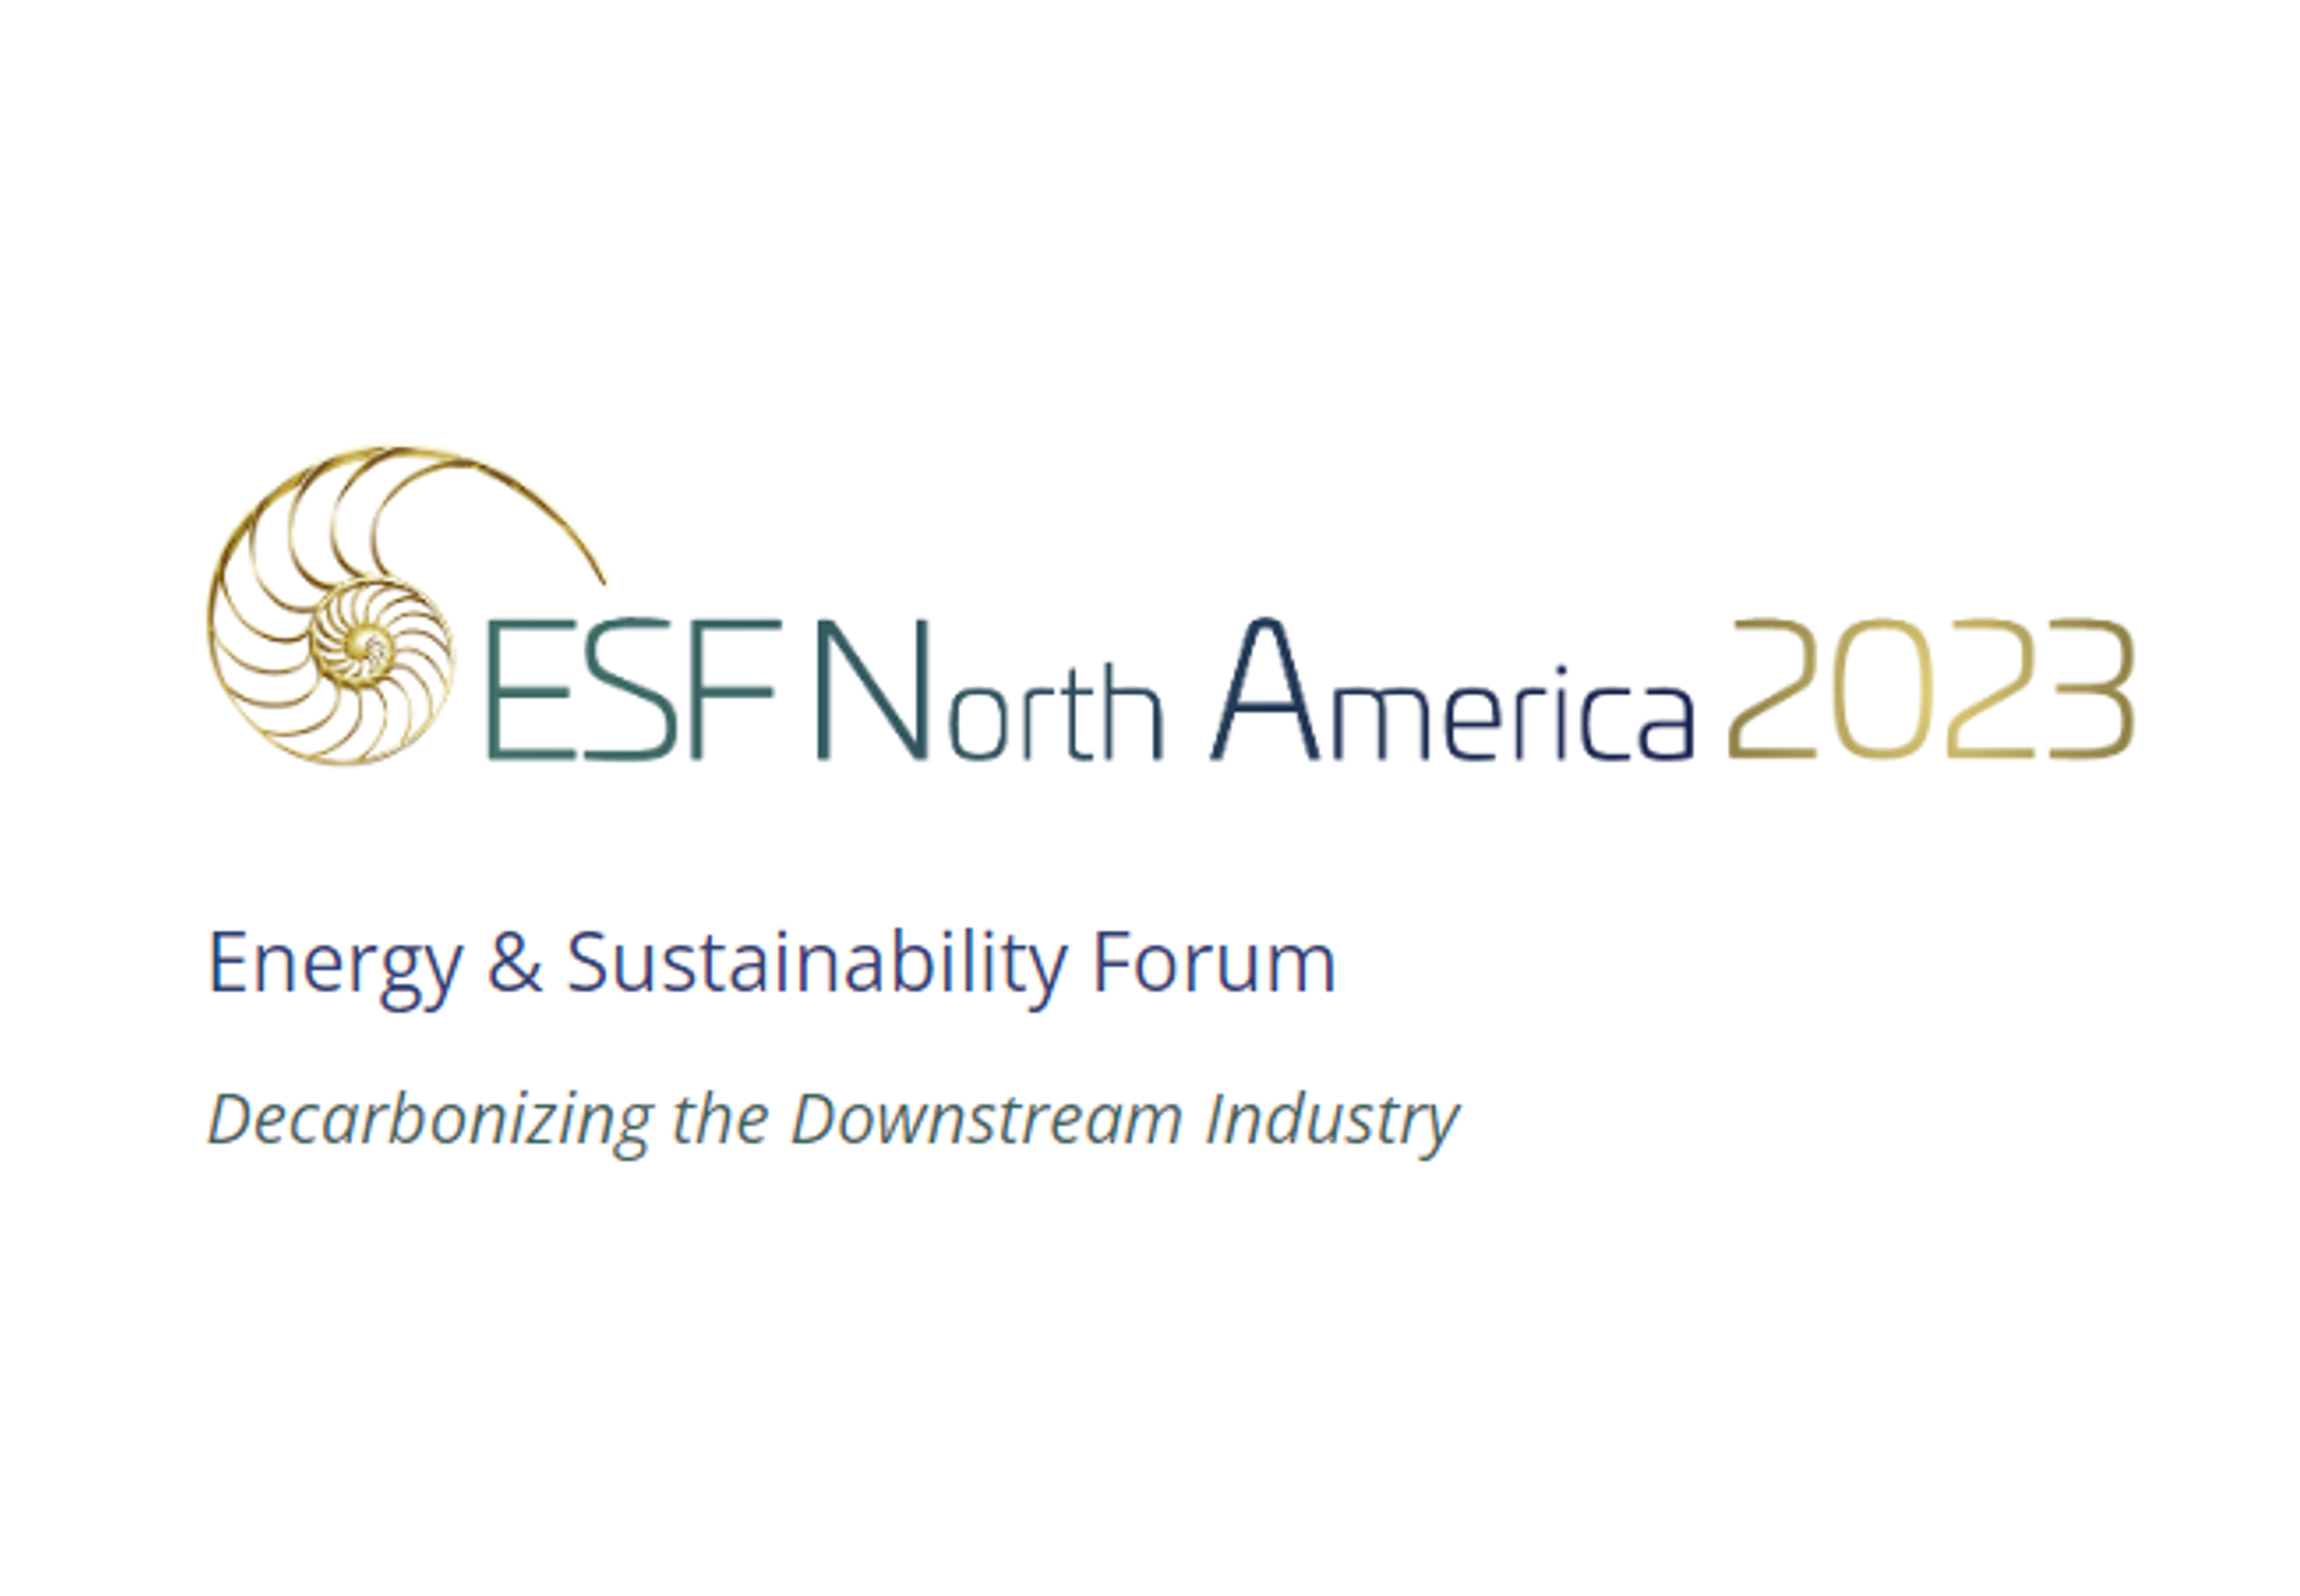 The 2nd ESF North America - Energy & Sustainability Forum